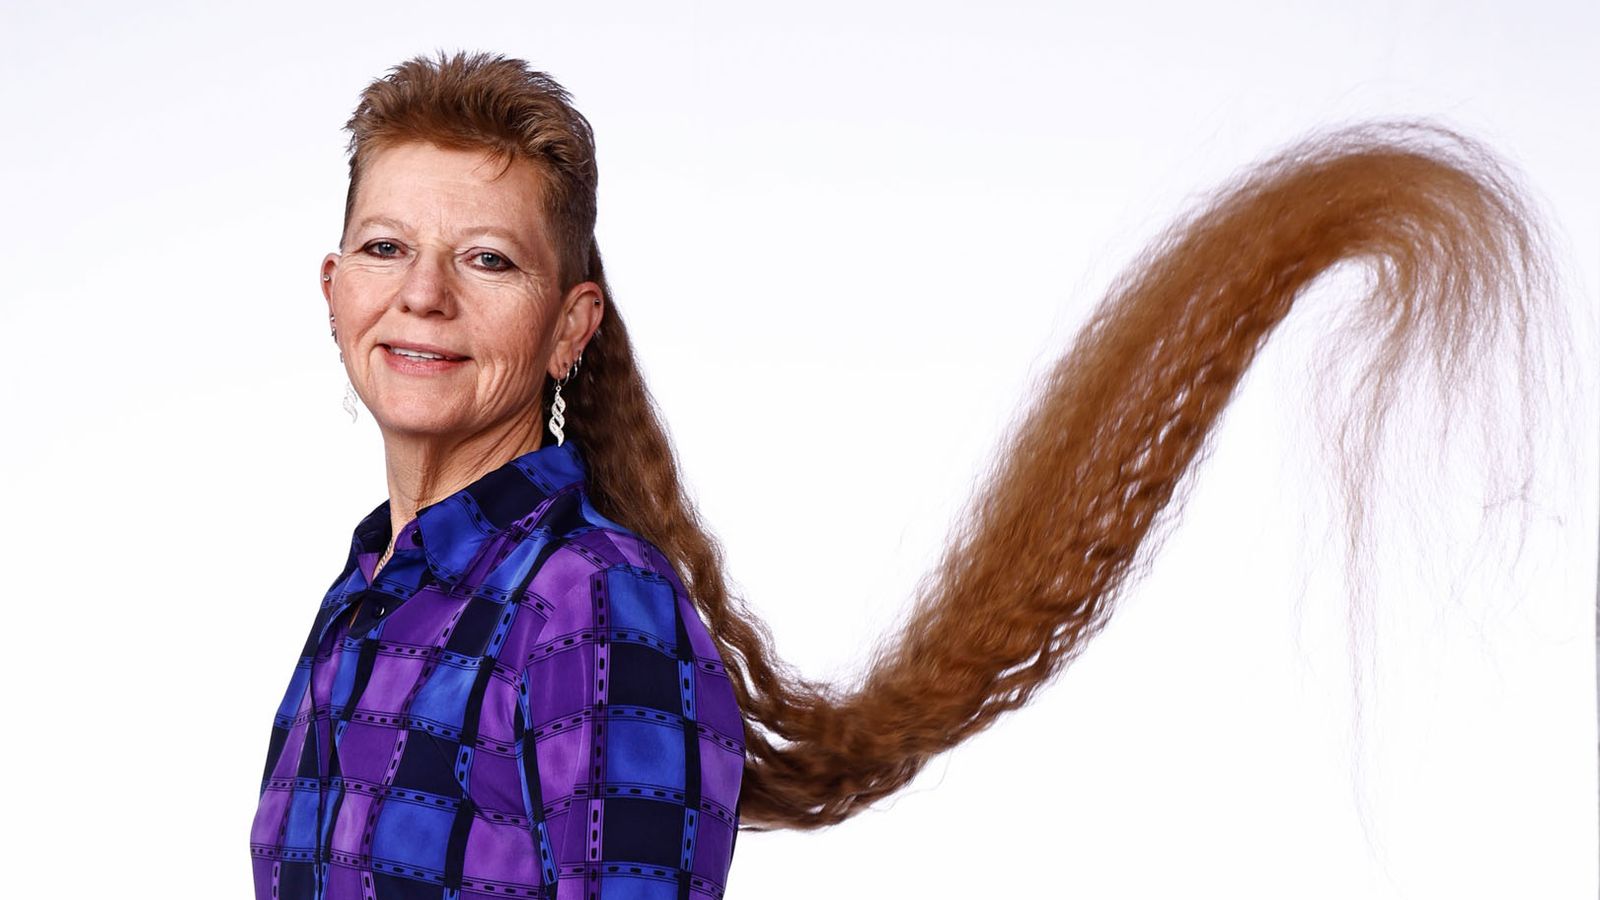 Tennessee woman sets record for world’s longest female mullet | US News